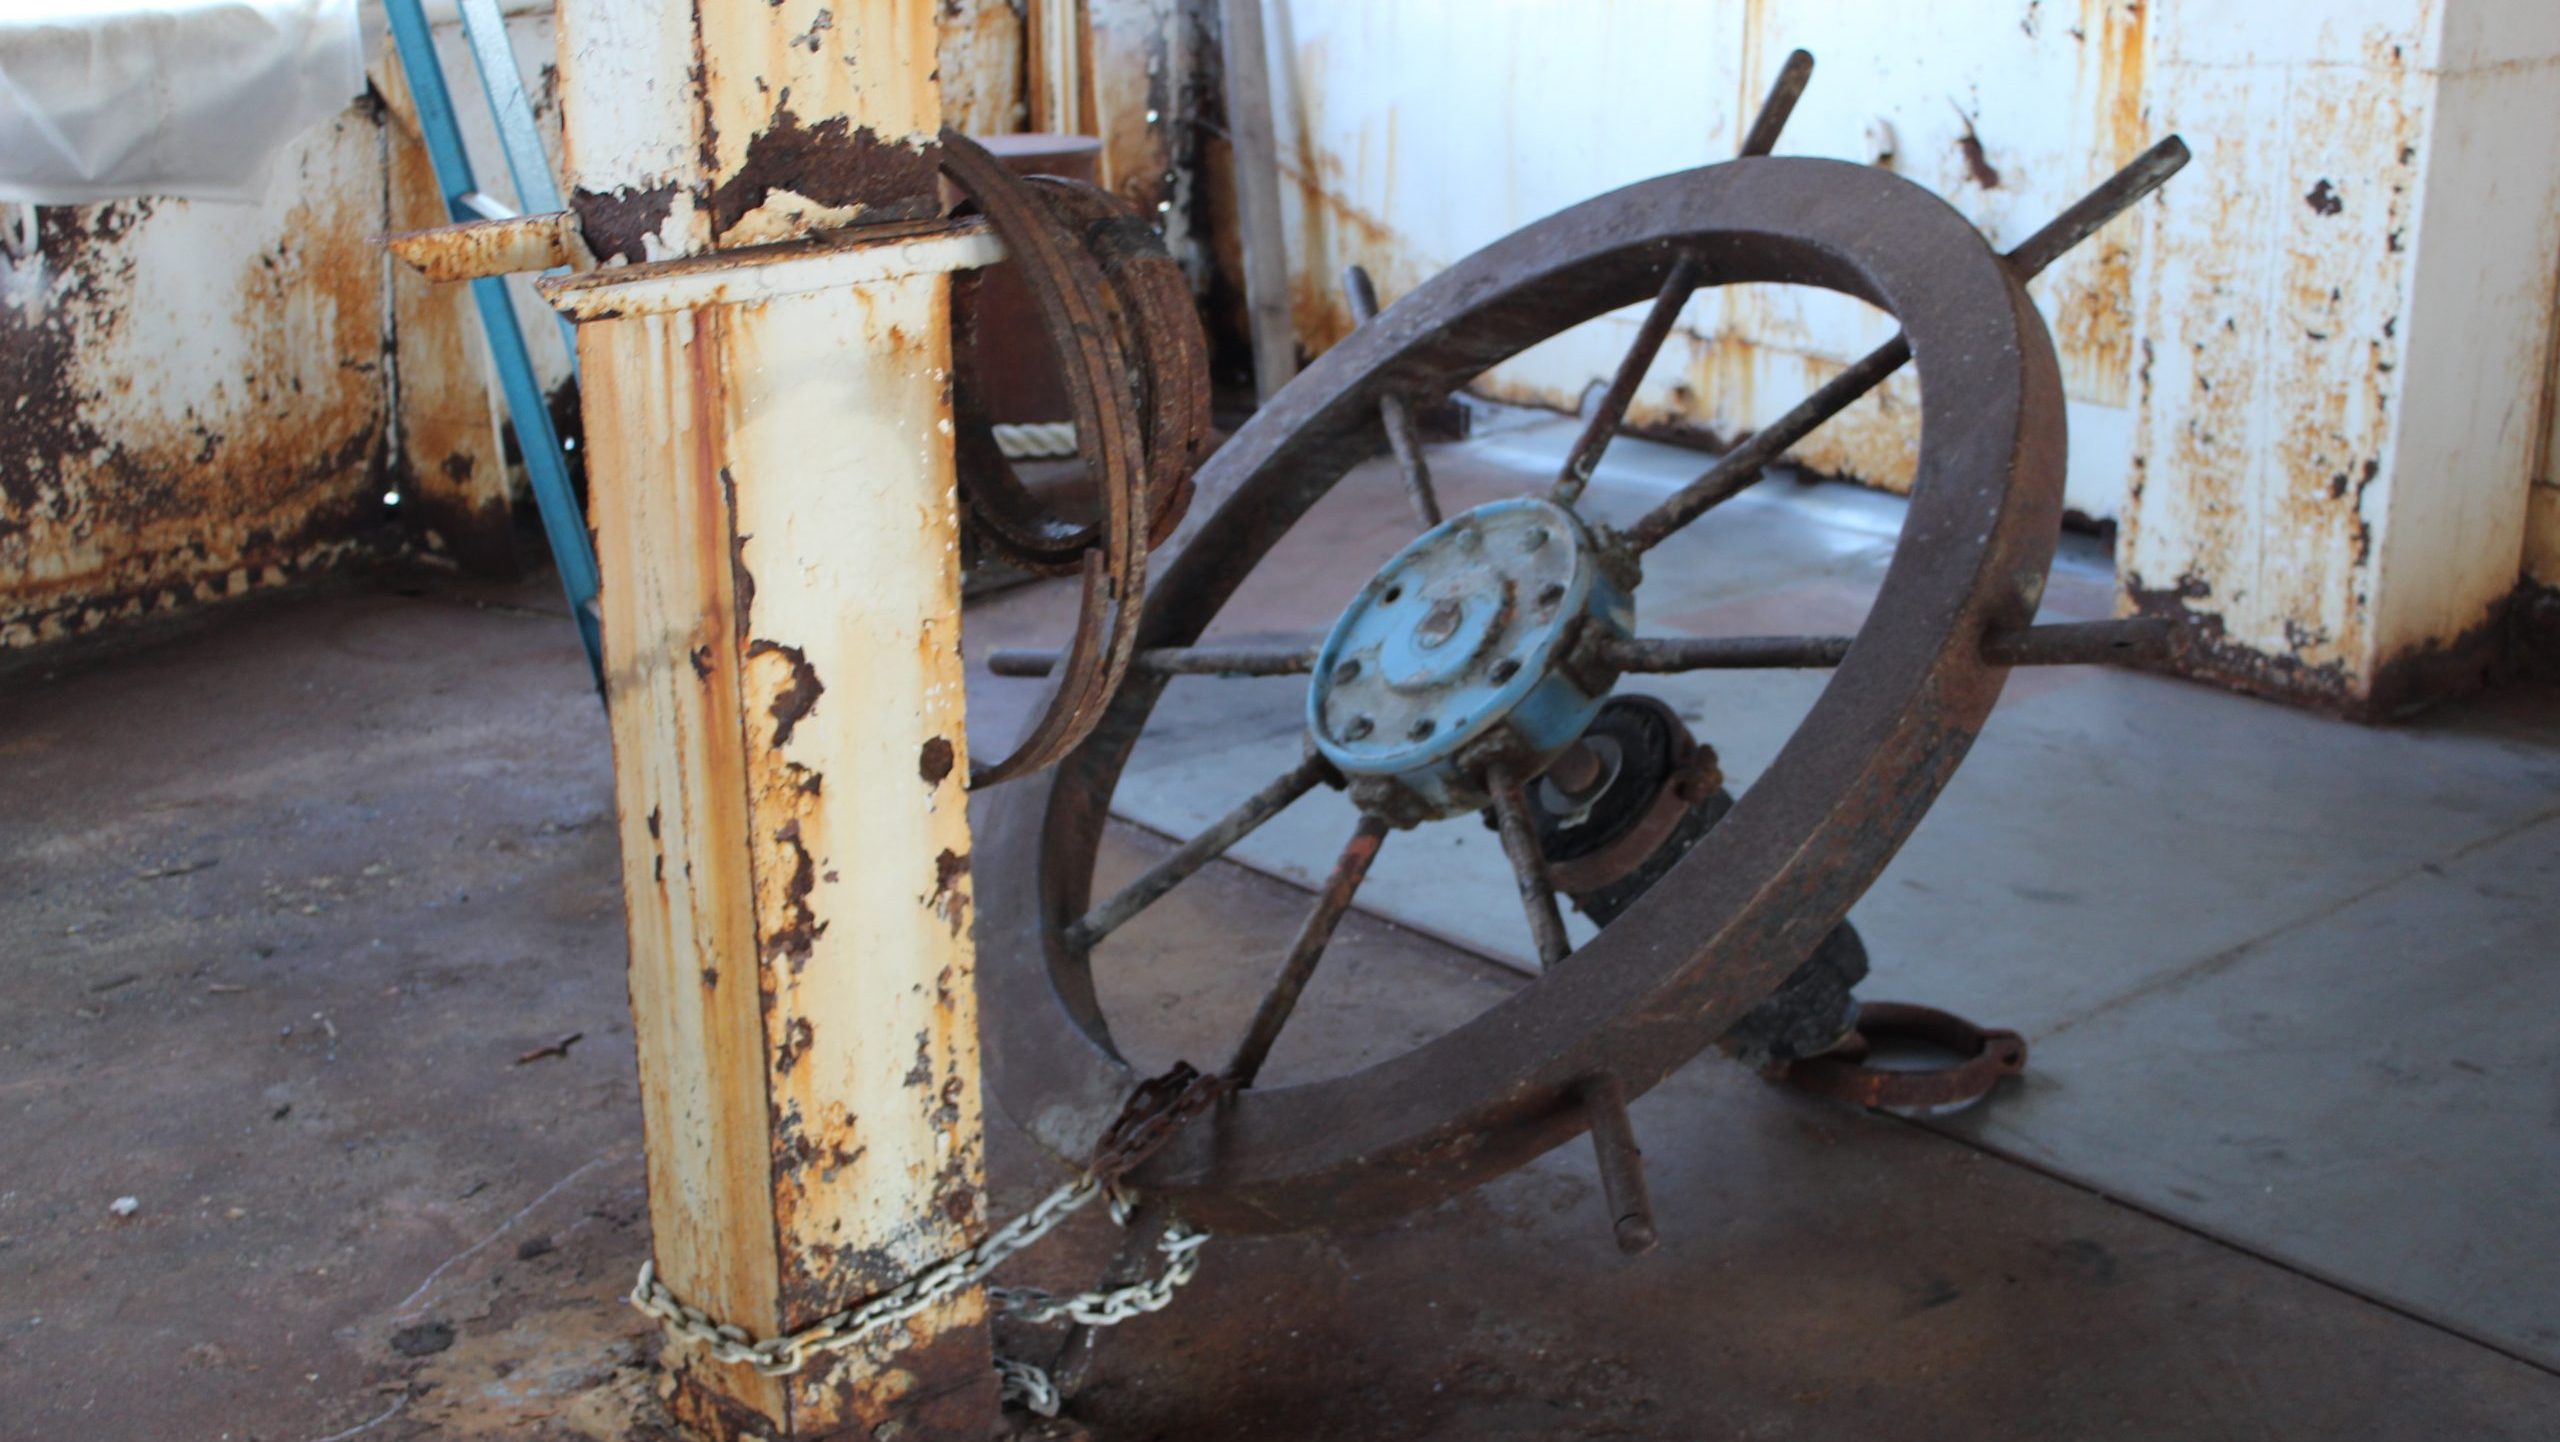 The steering wheel that kids used to take photos with on the ship.